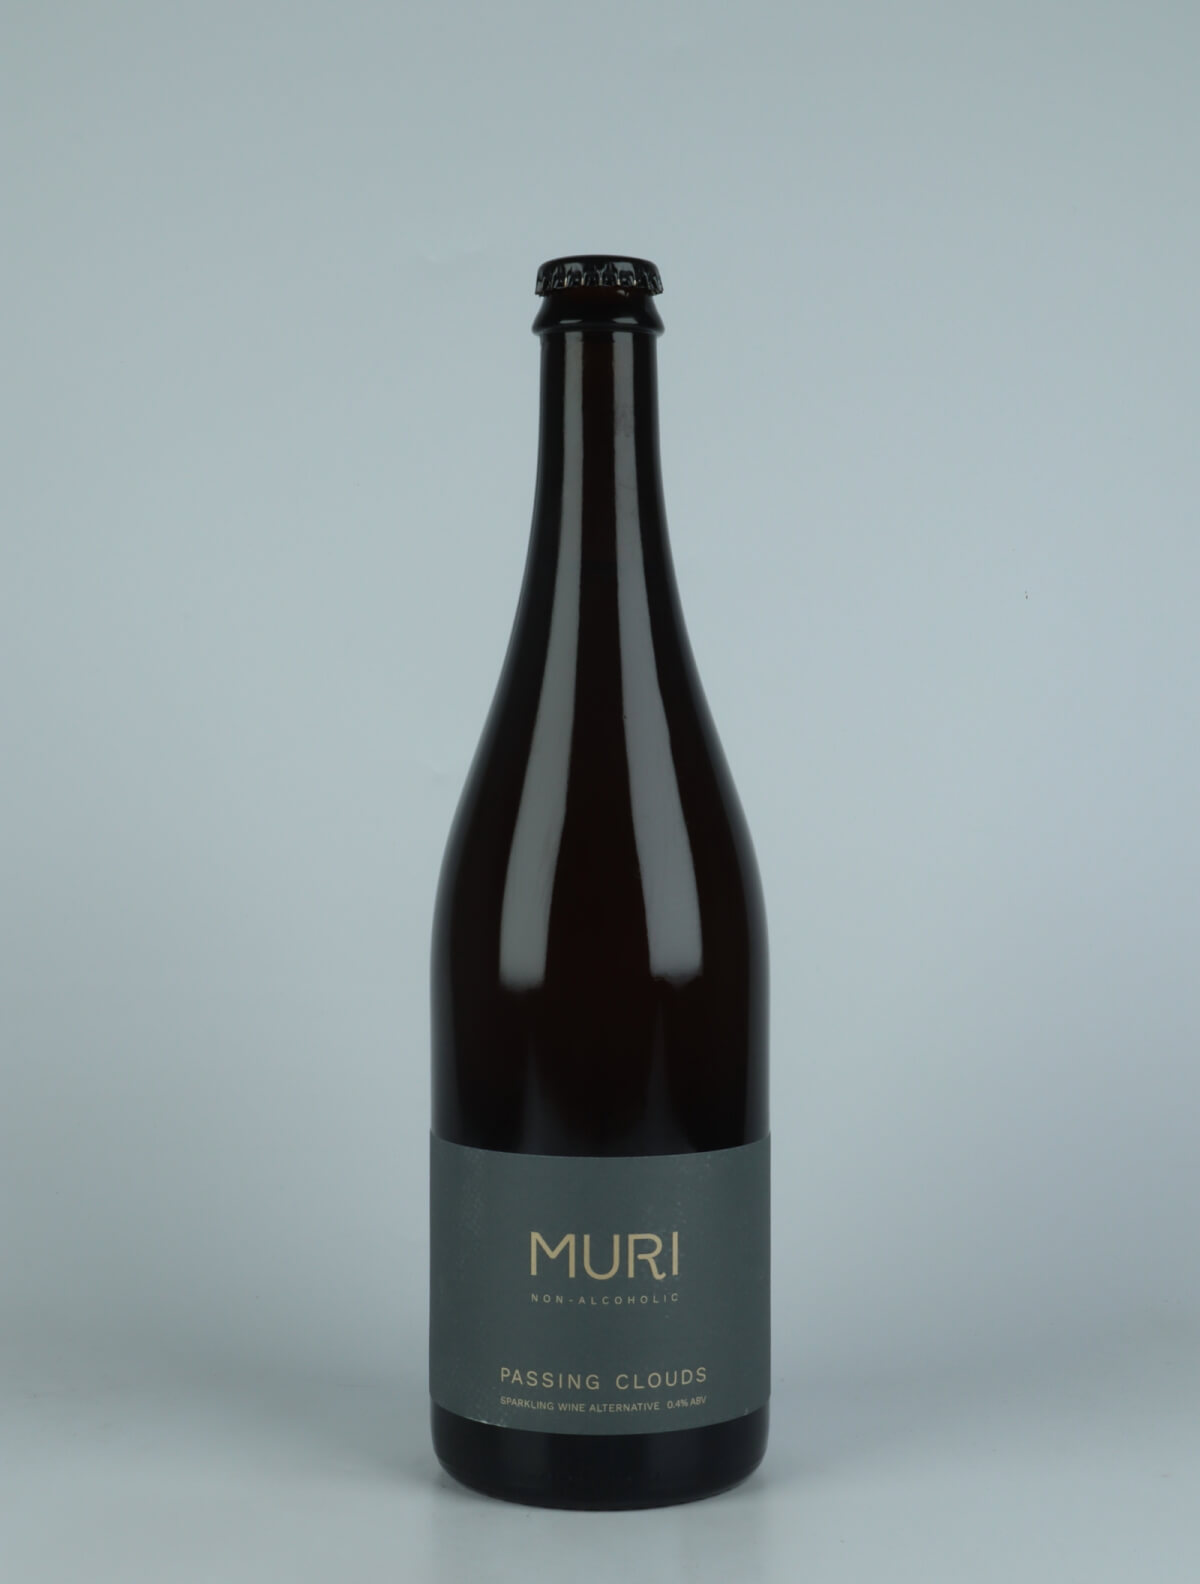 A bottle N.V. Passing Clouds Non-alcoholic from Muri, Copenhagen in Denmark